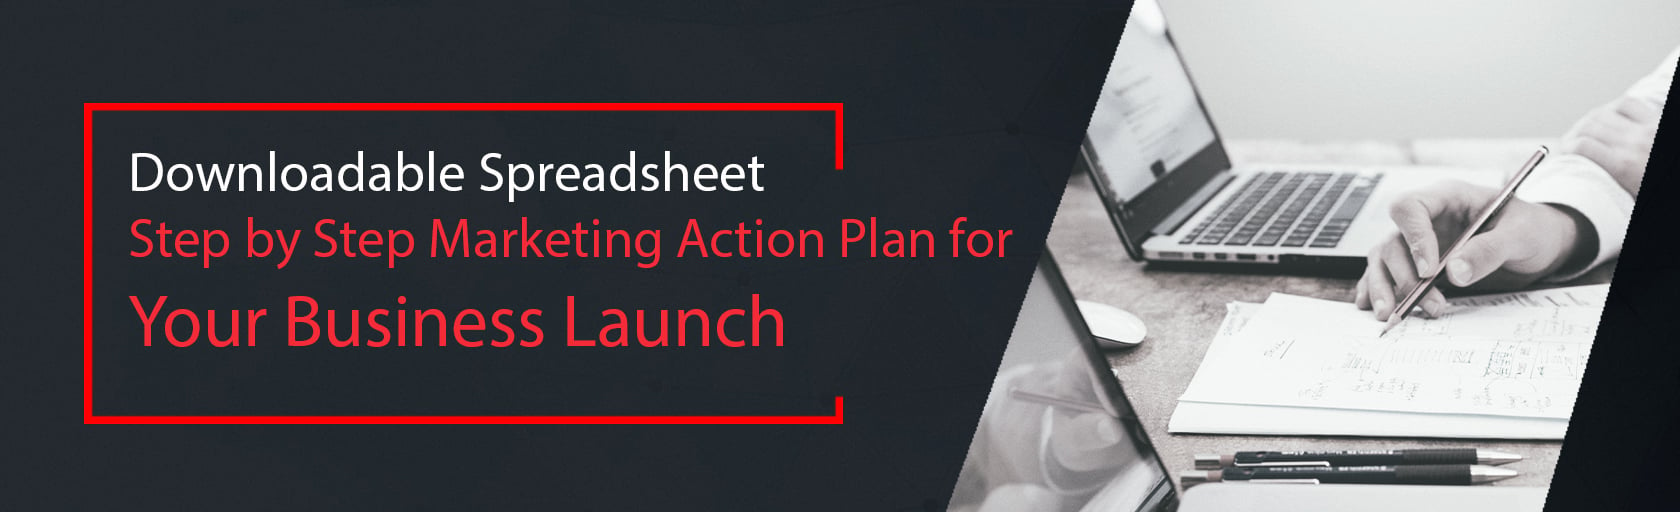 banner Downloadable Spreadsheet  - Launch Your Business_Small